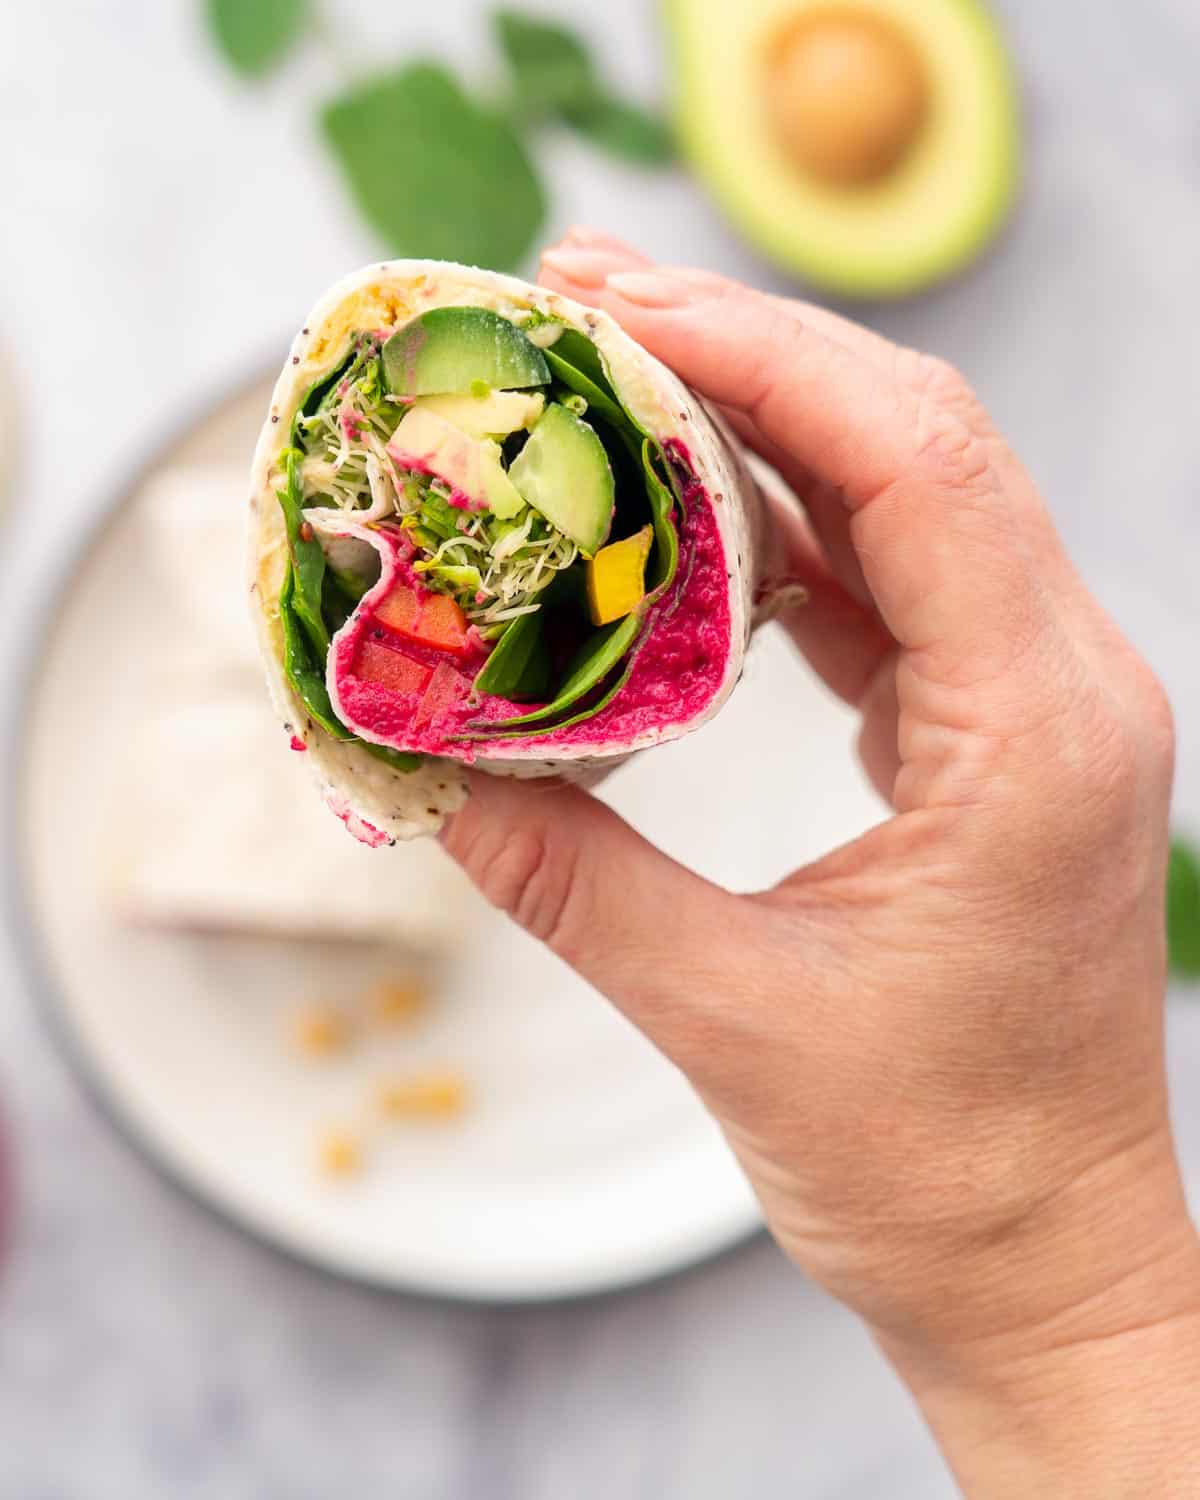 A hand holding up a halved filled wrap stuffed with beetroot hummus, cucumber, sprouts, spinach and capsicum